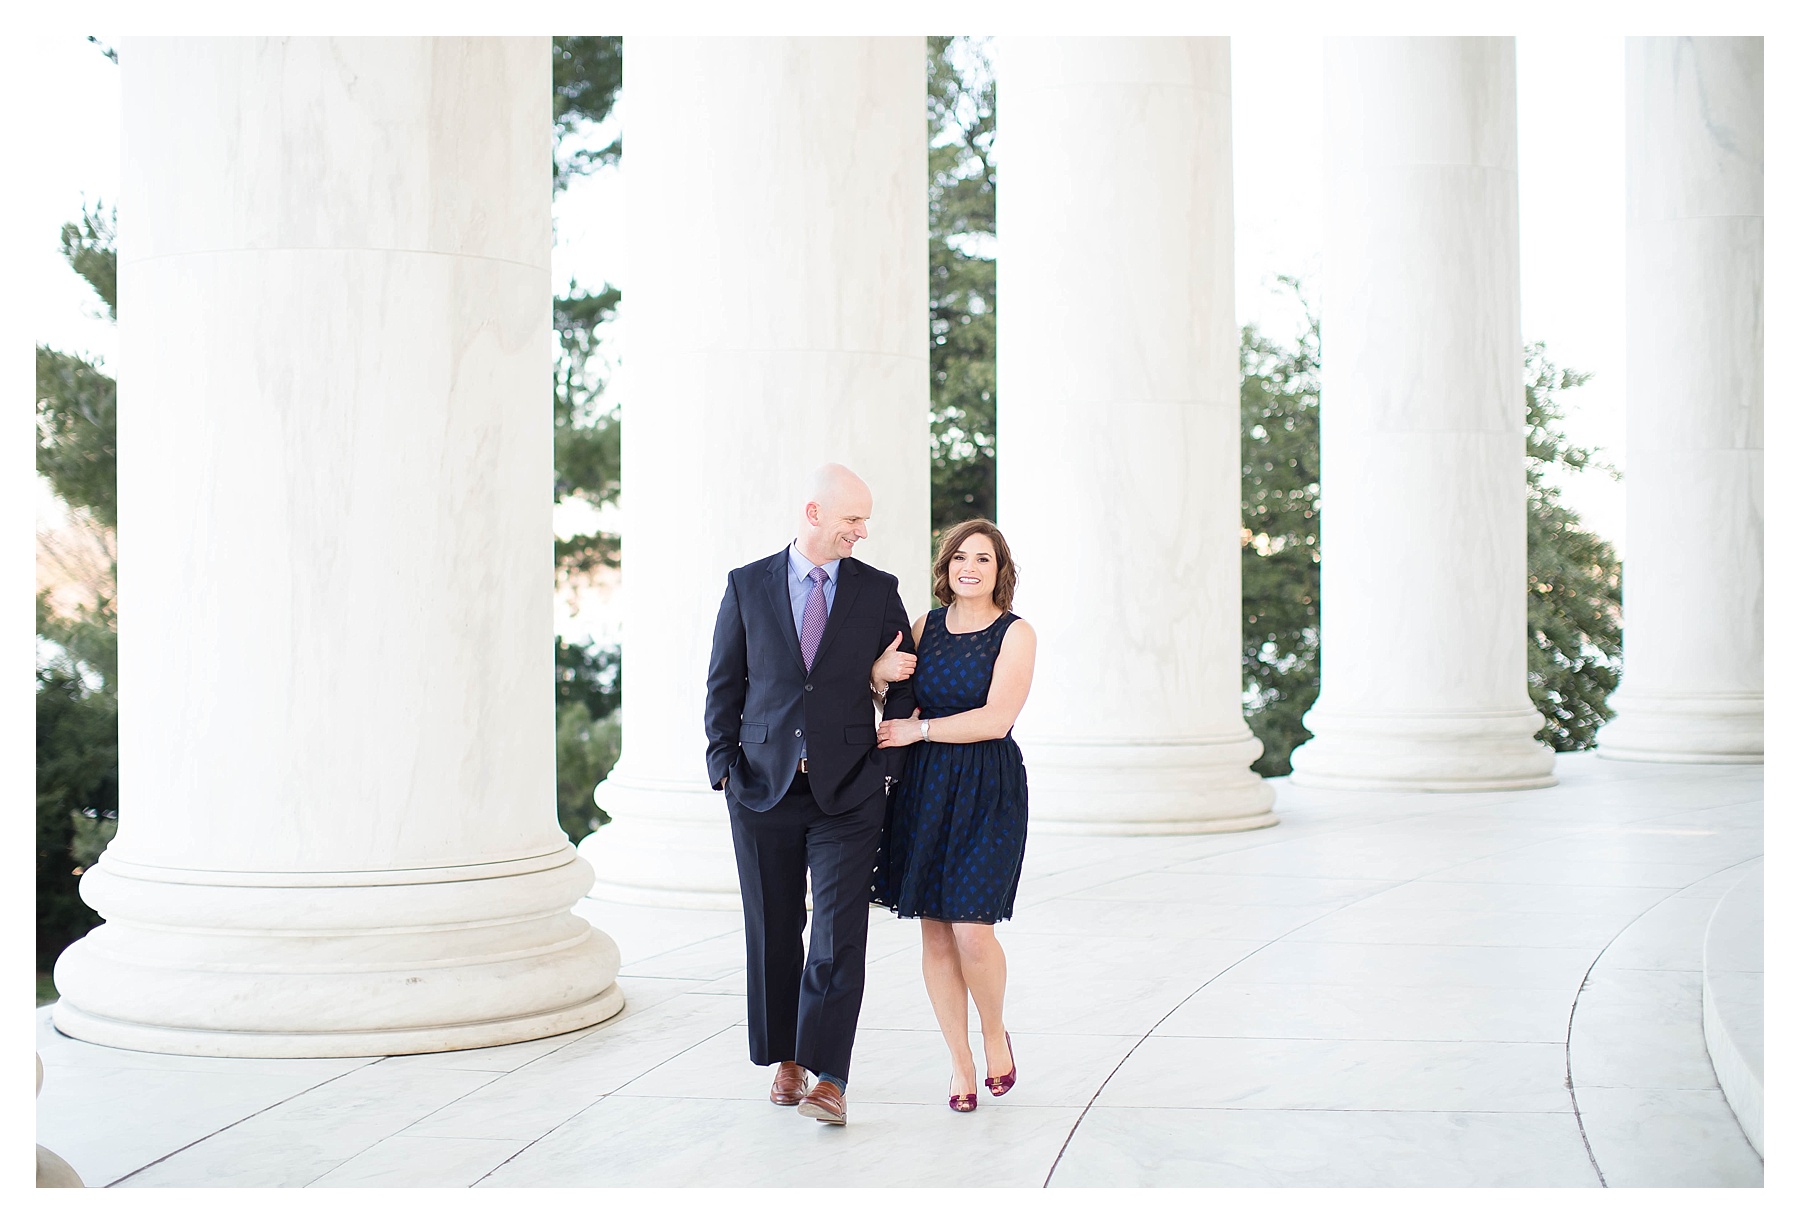 Candice Adelle Photography DC Destination Wedding Photographer Cherry Blossom Engagment Session_0041.jpg